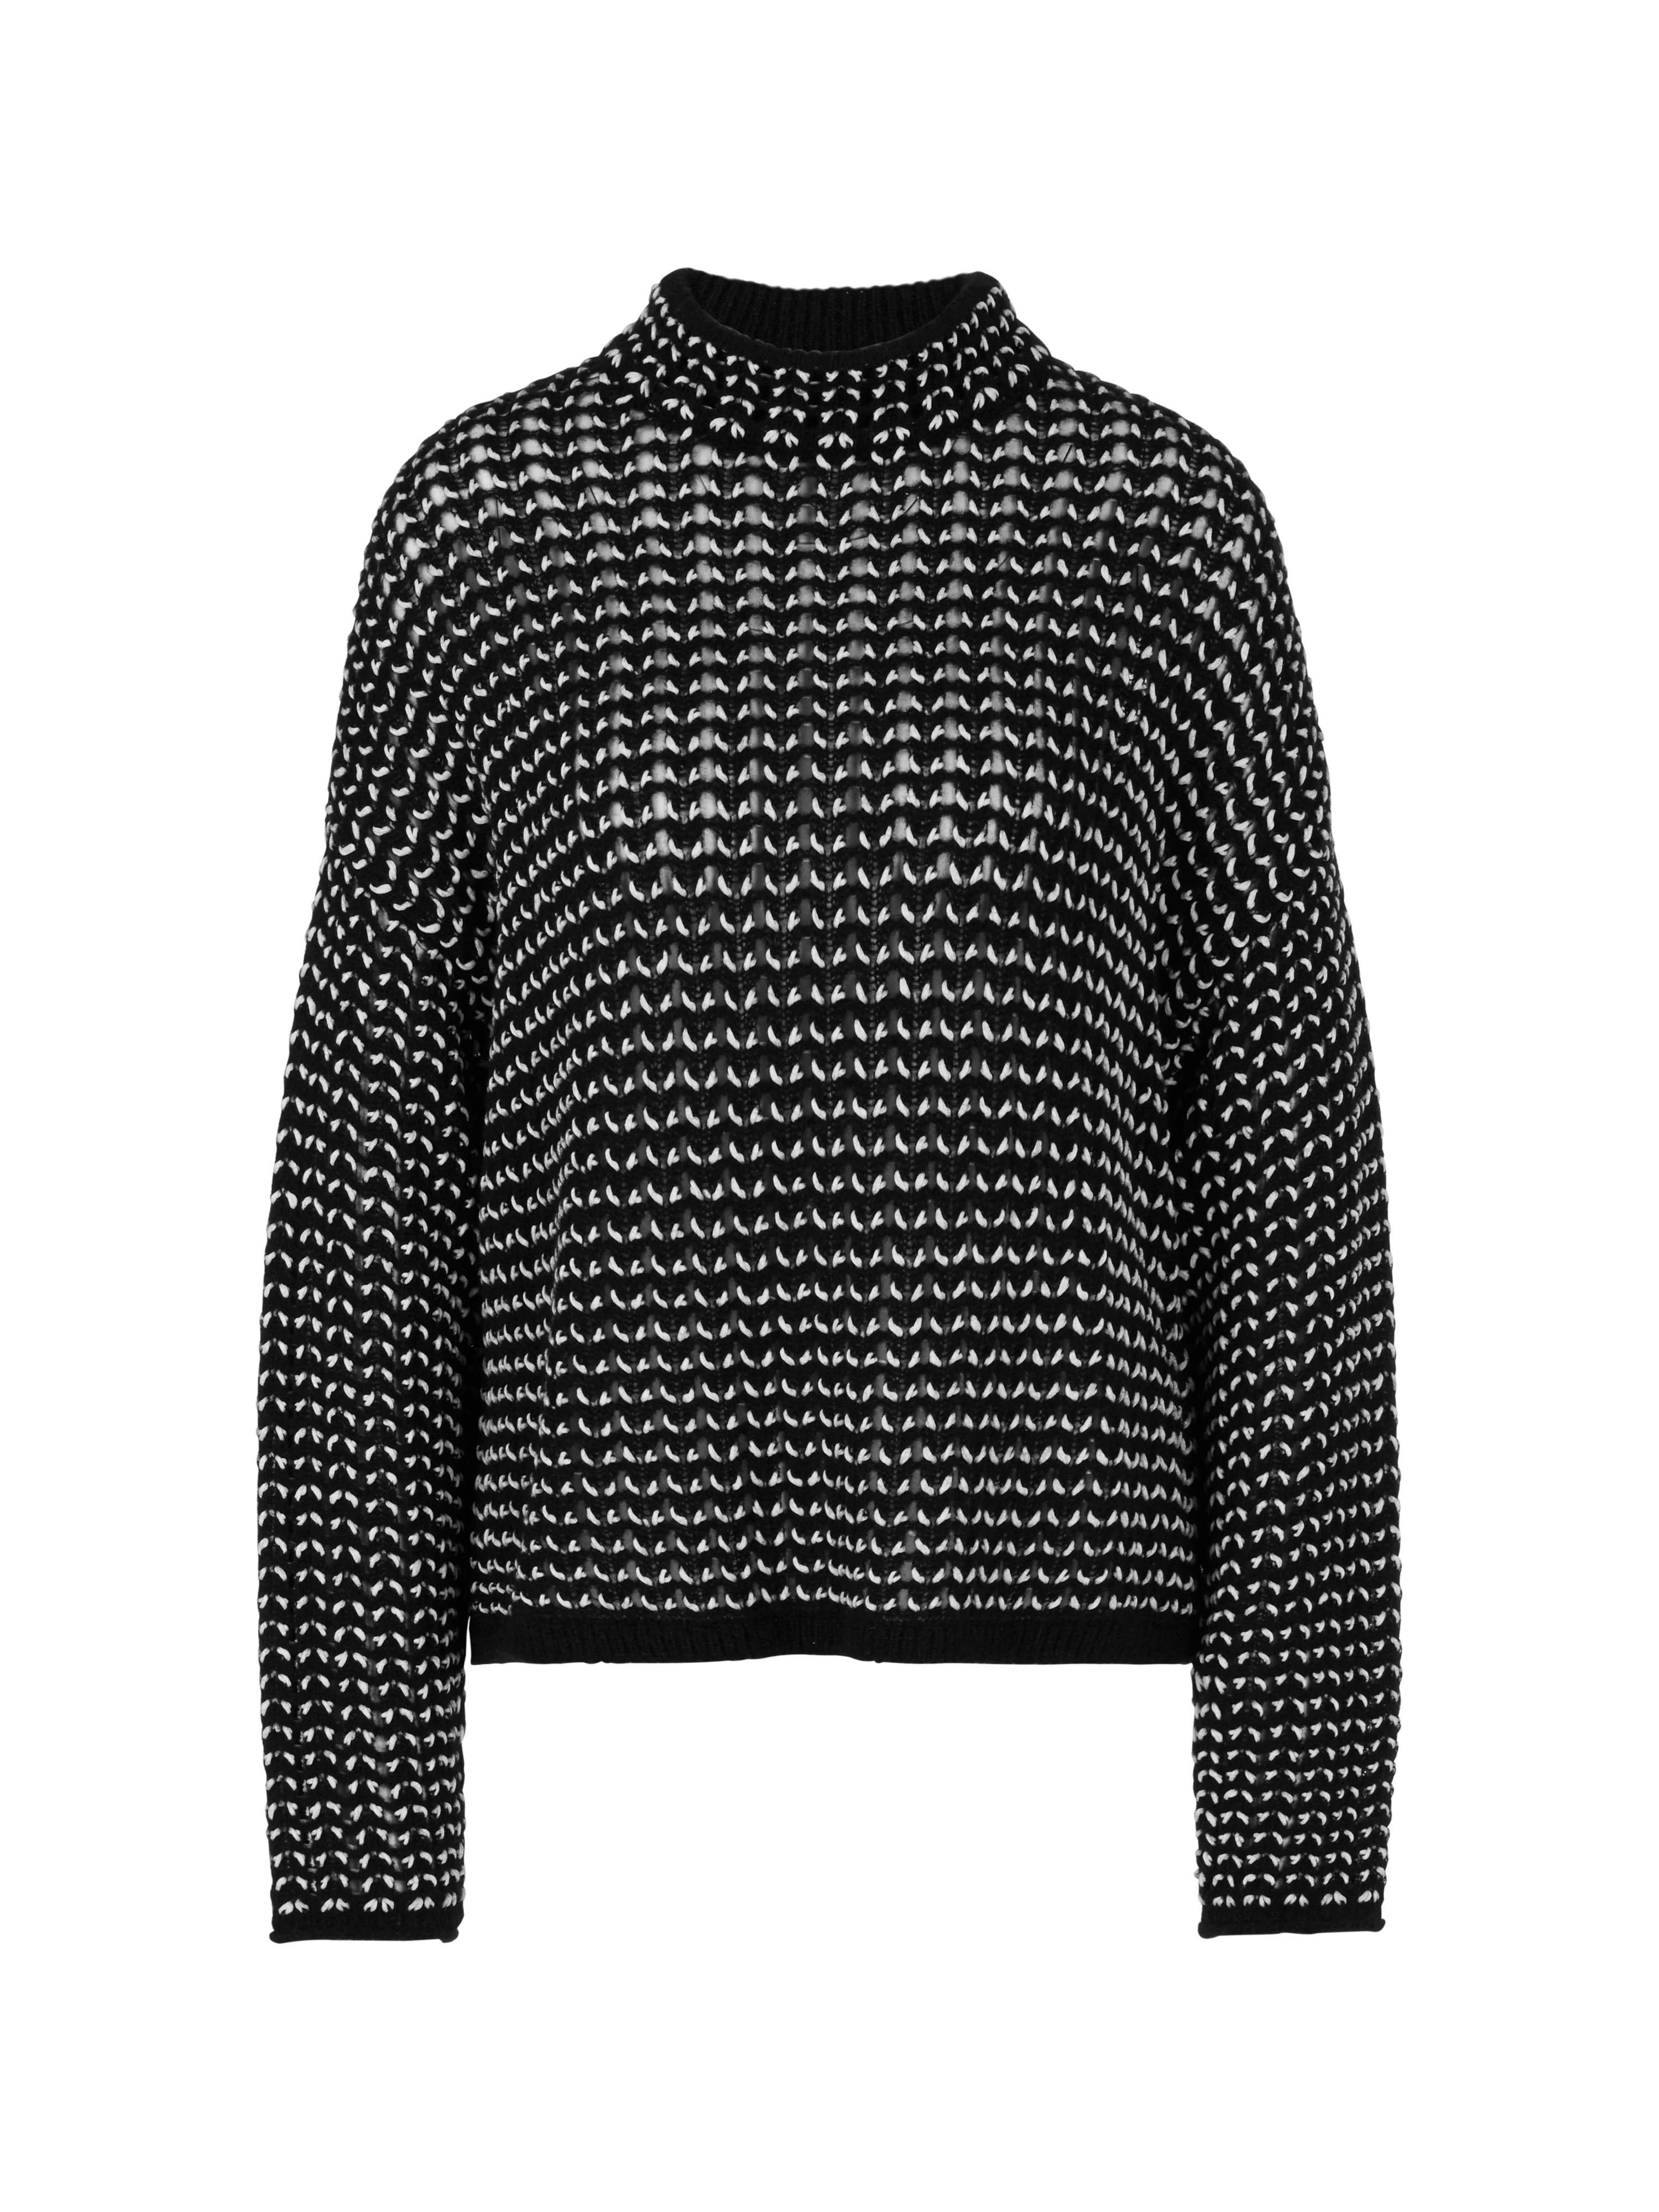 MARC CAIN WC 41.34 M21 Oversized-Pullover Knitted in Germany black and white